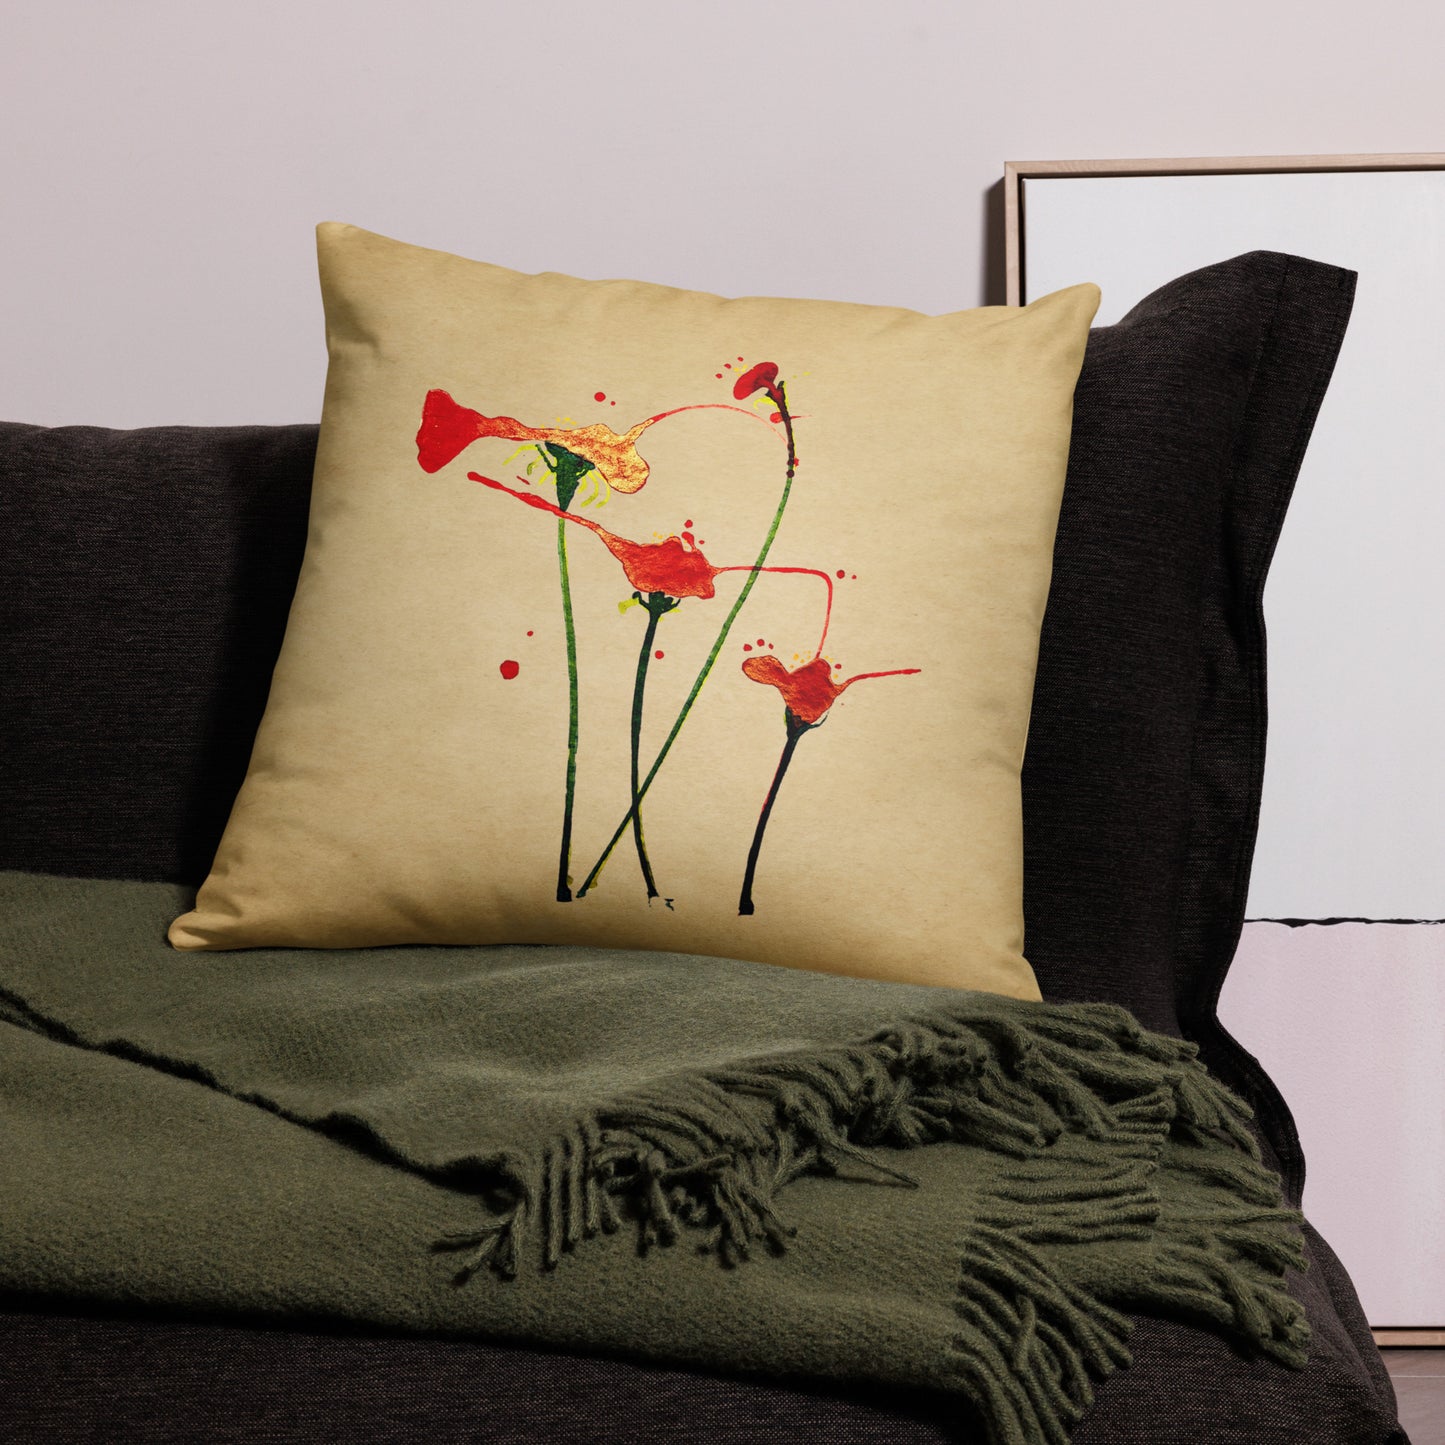 Floral Golden Tint: Cushions Covers